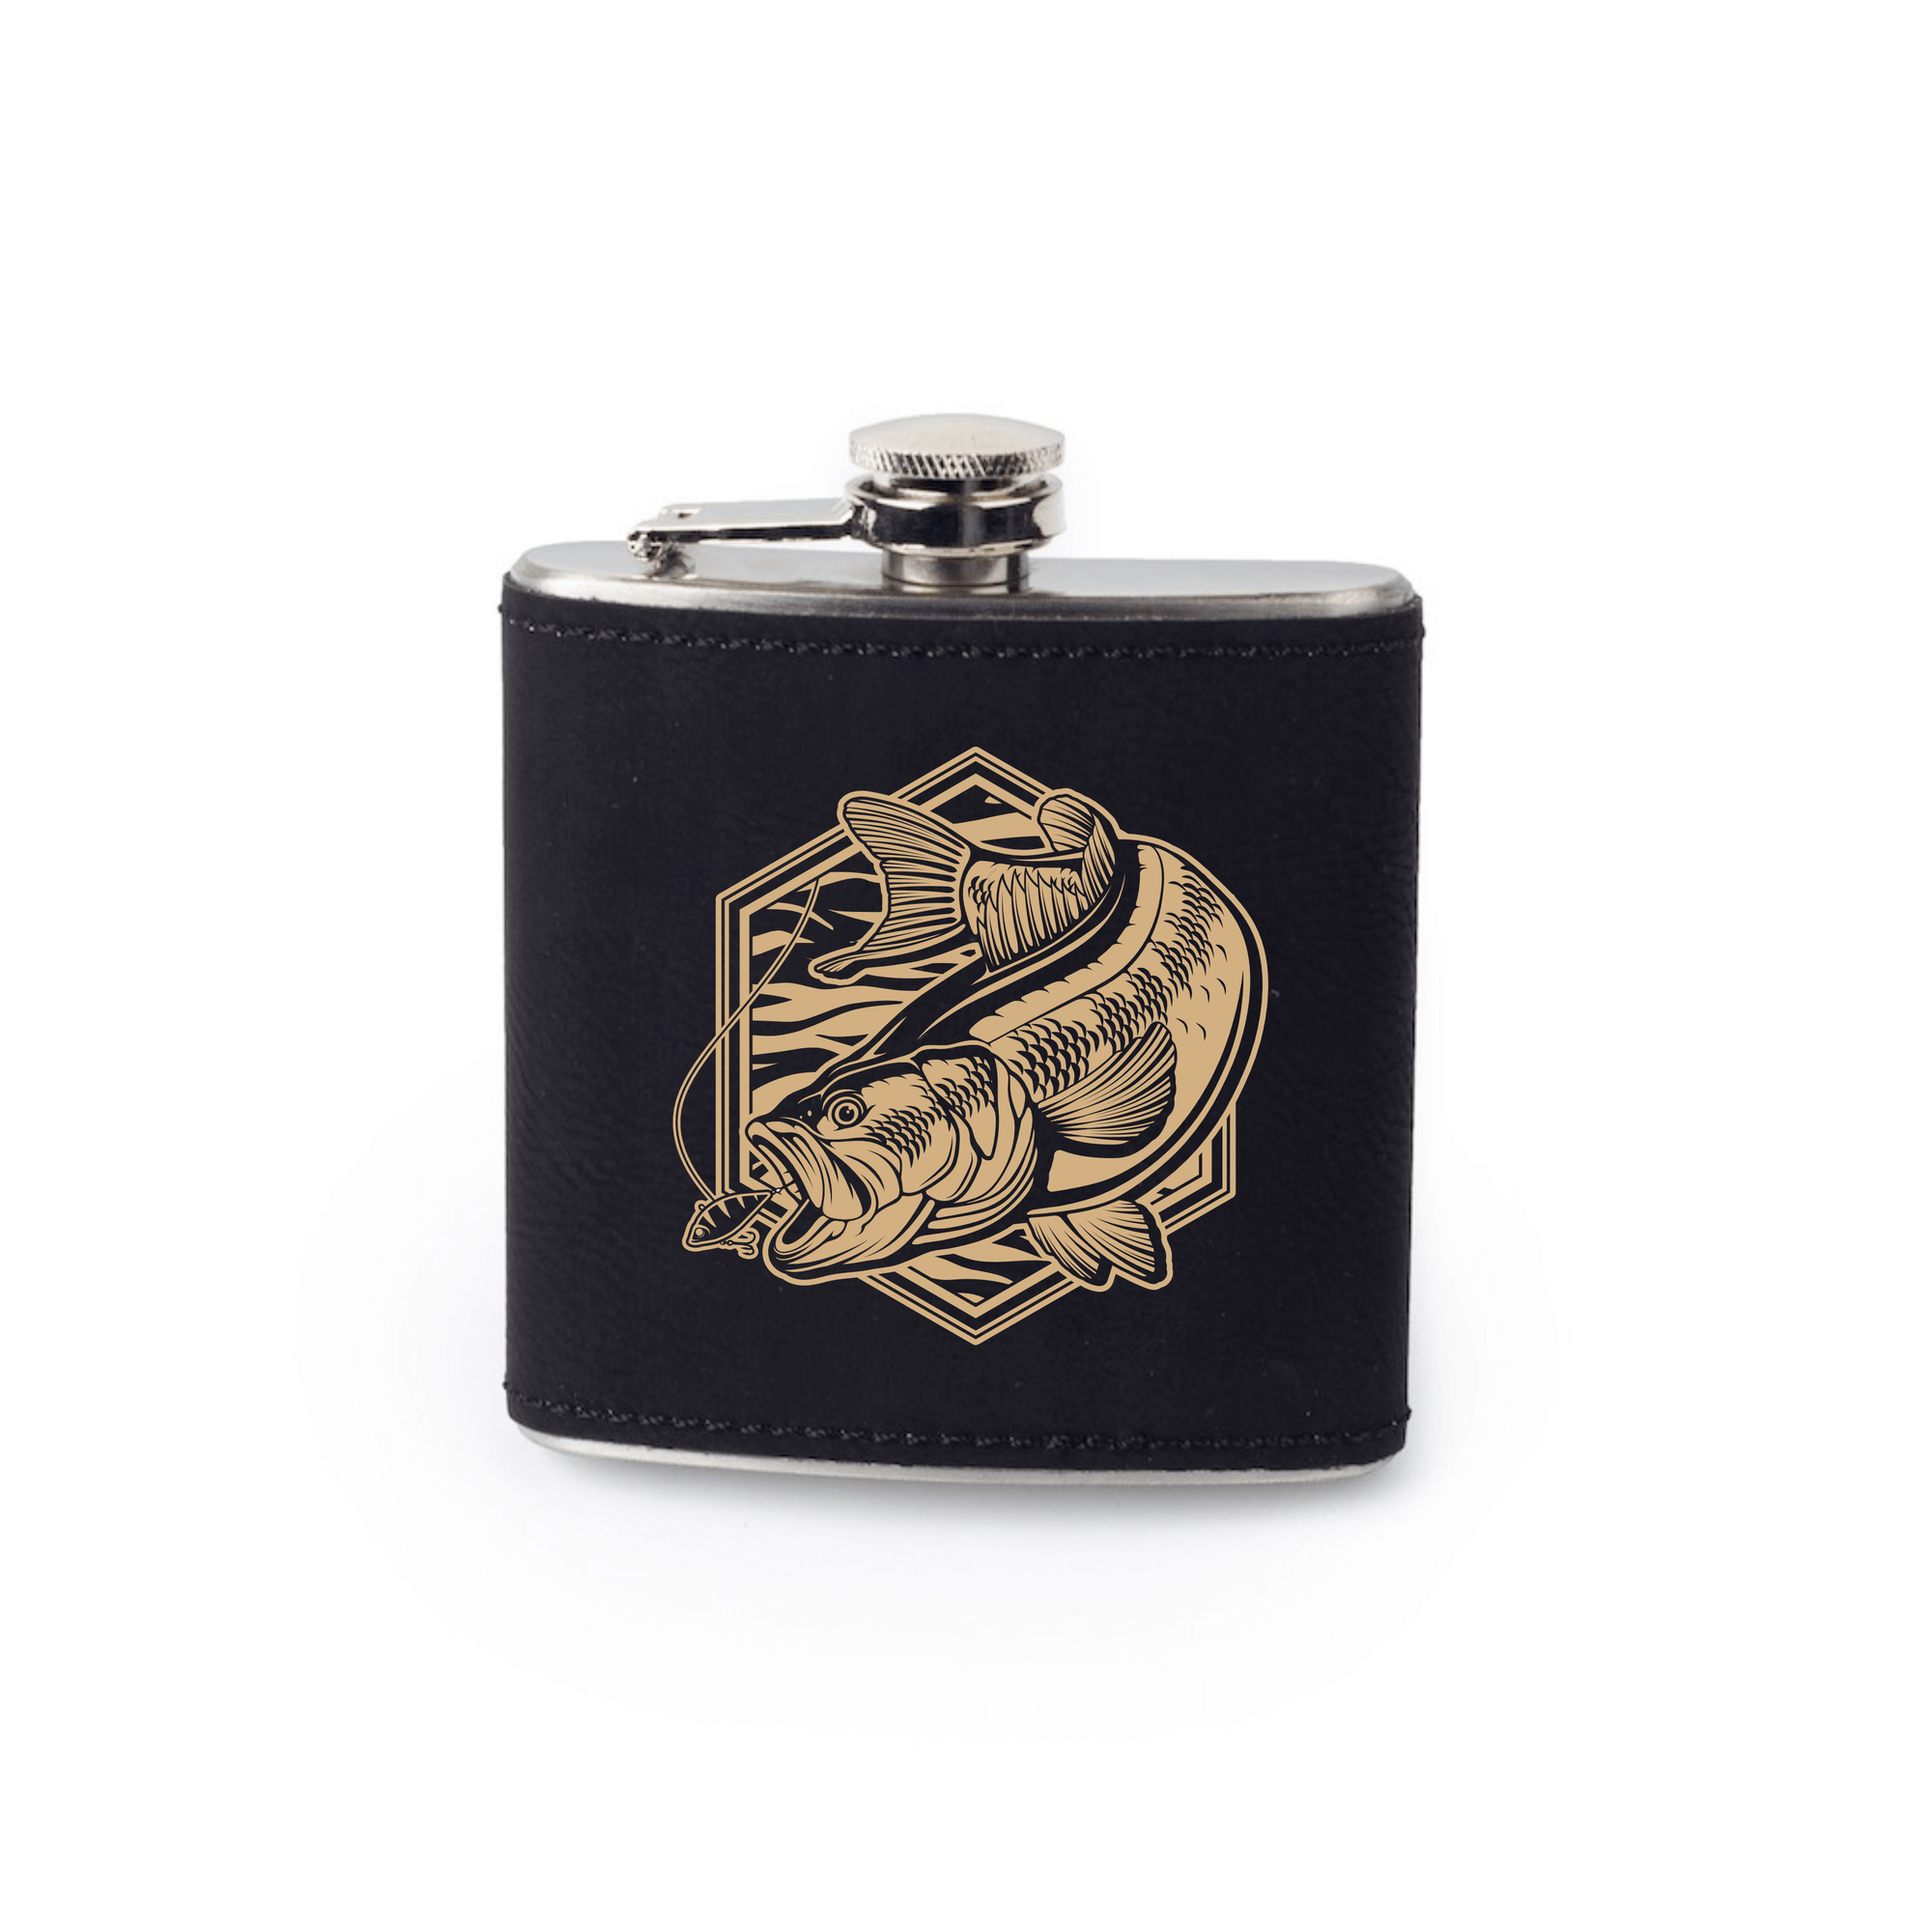 Bass Fishing Flask with bass artwork by Joel Jensen Art  laser engraved - gold on black leather